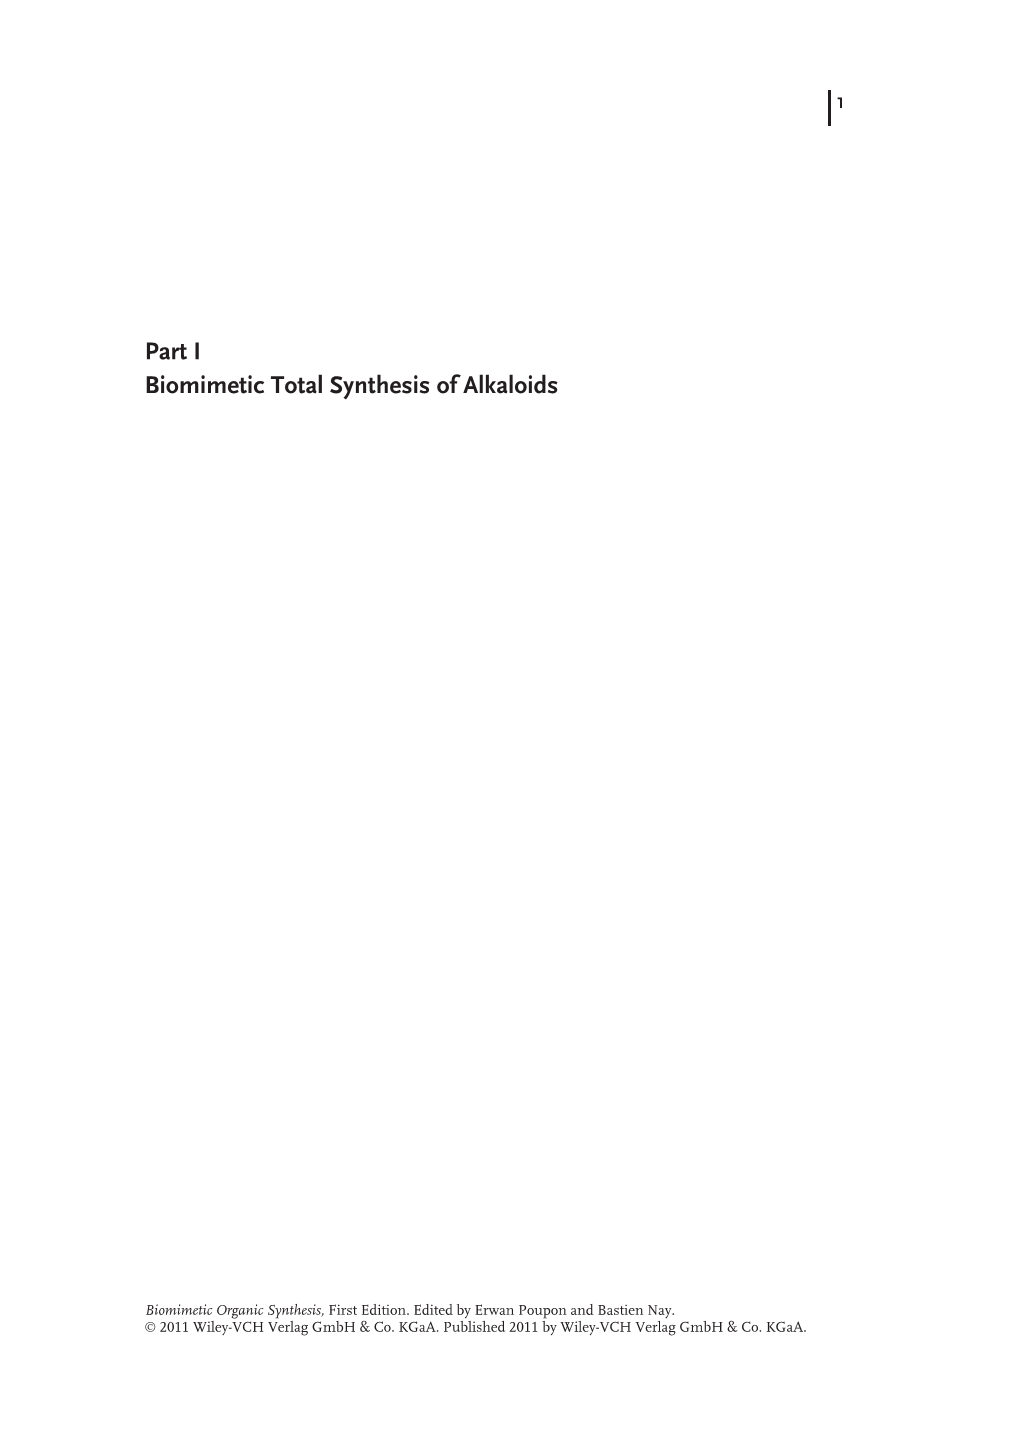 Part I Biomimetic Total Synthesis of Alkaloids